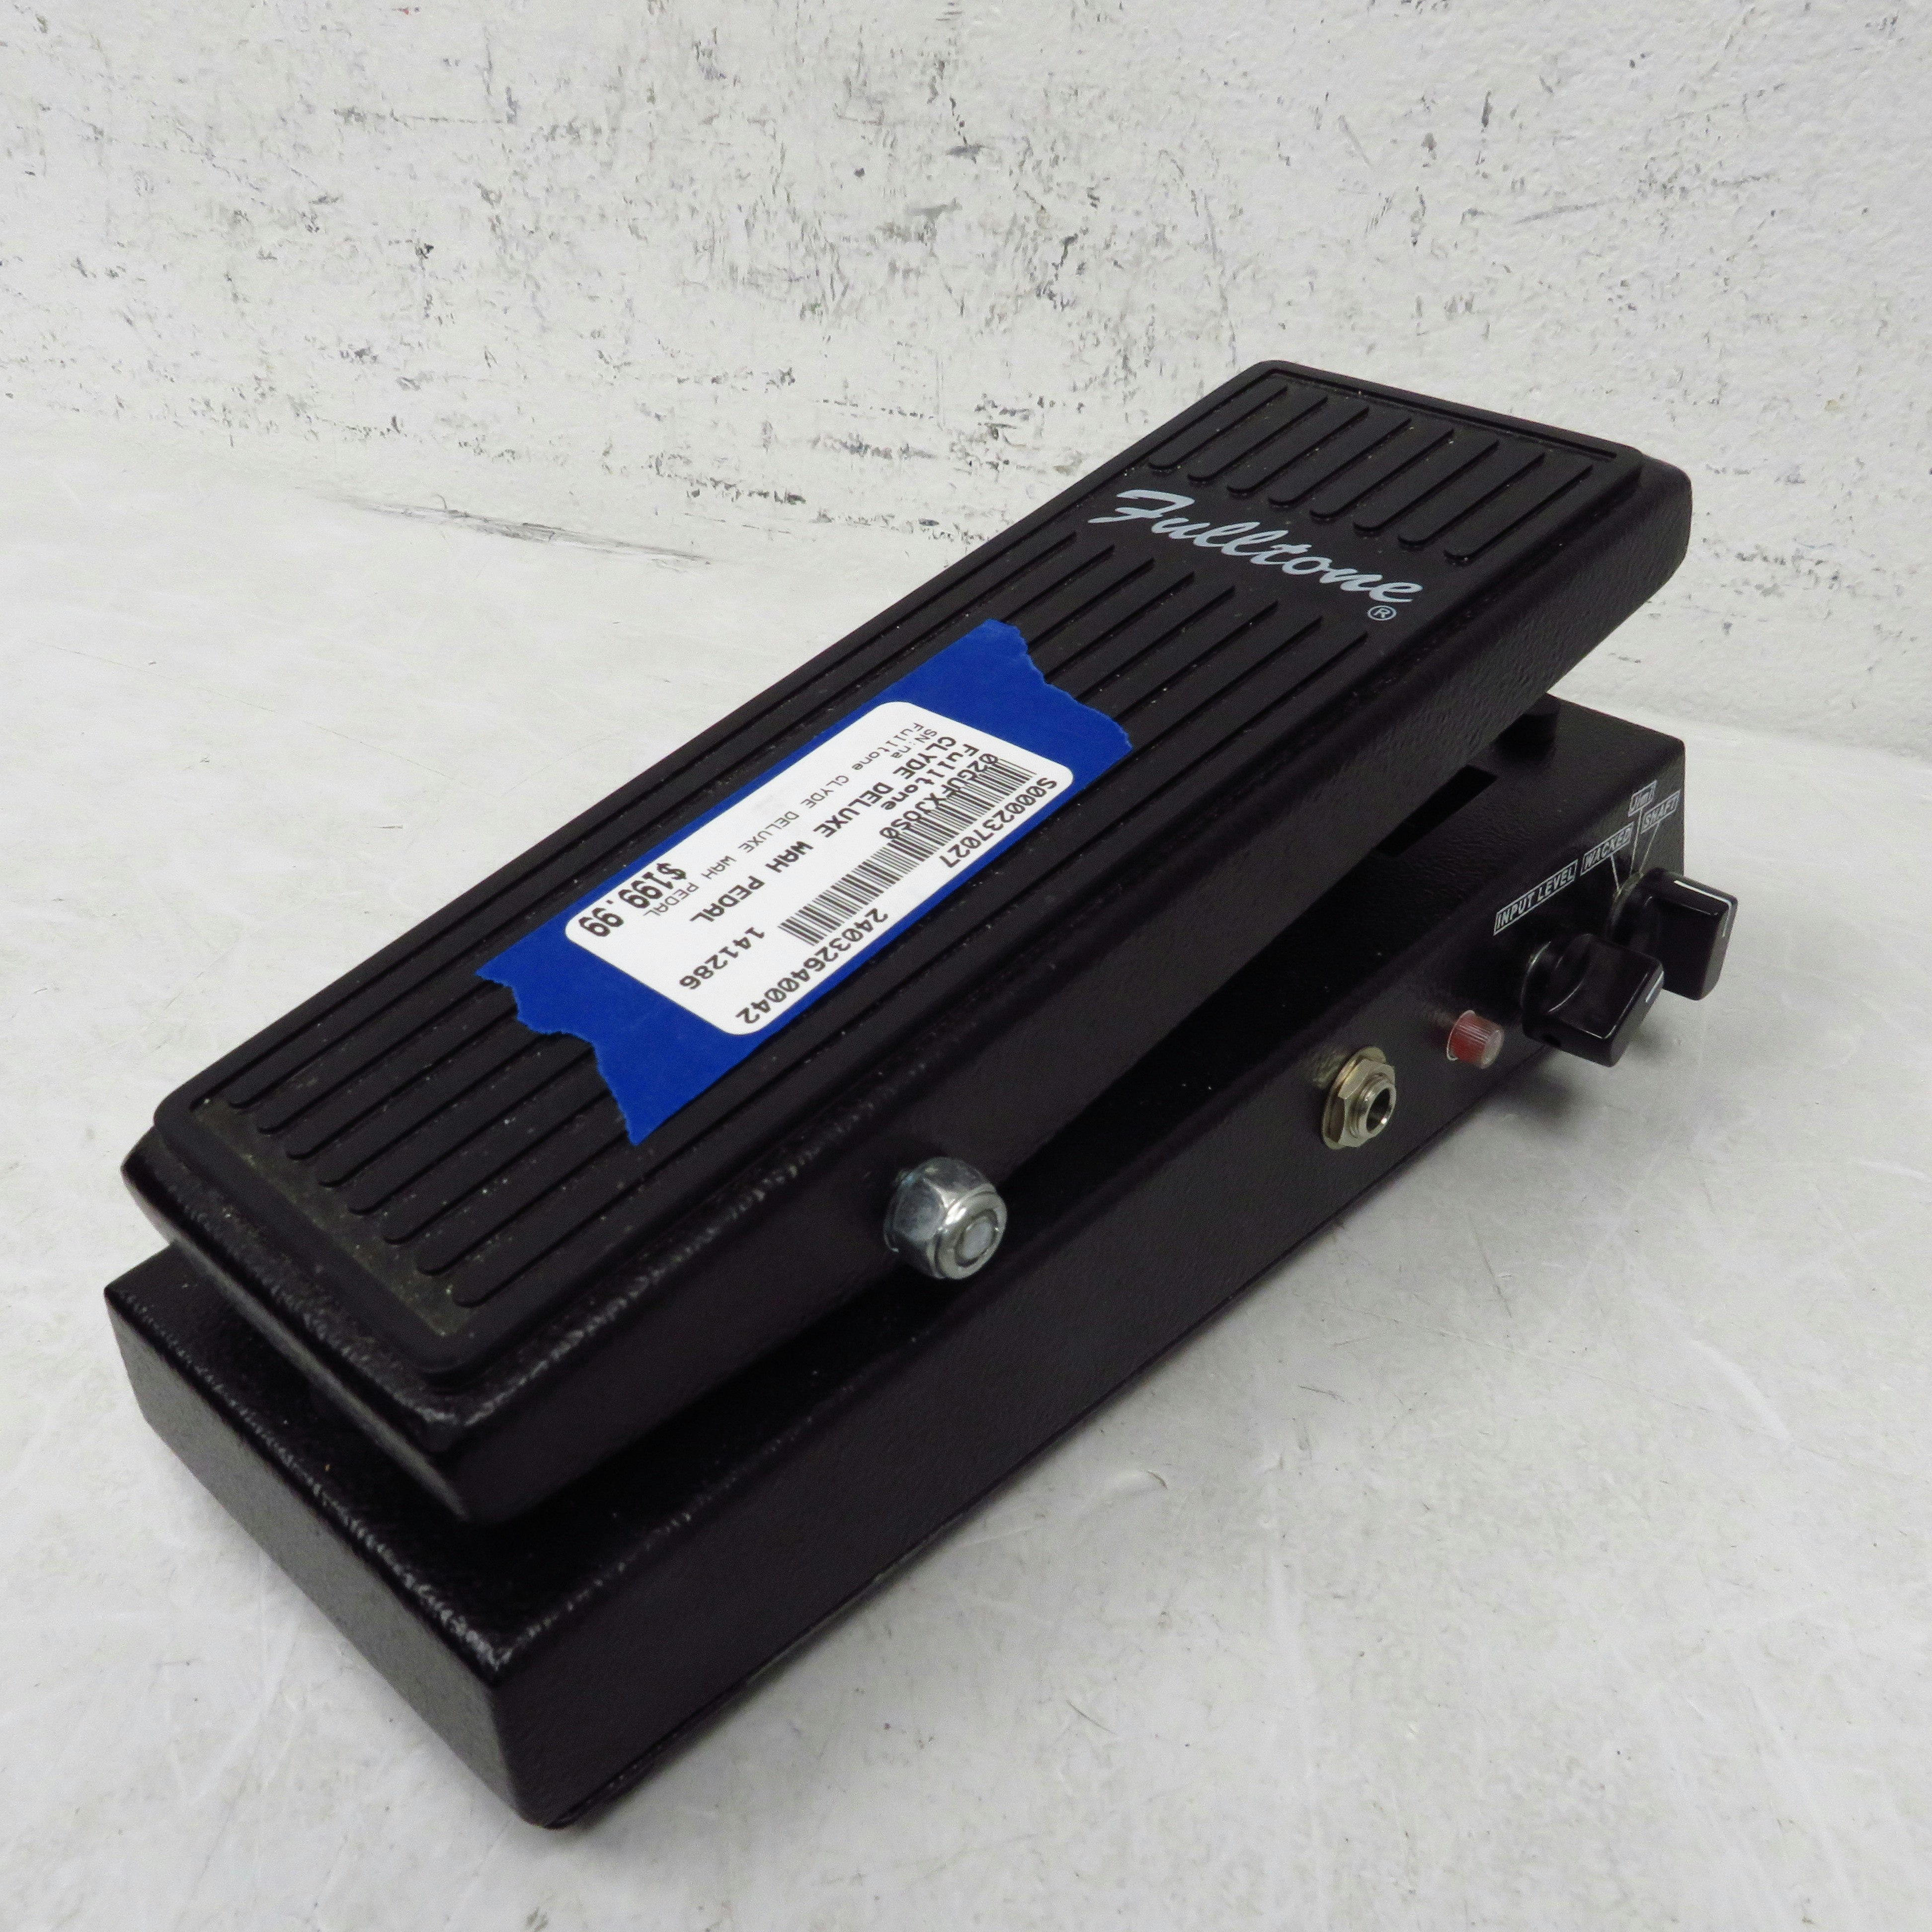 Used Fulltone Clyde Deluxe Wah Pedal